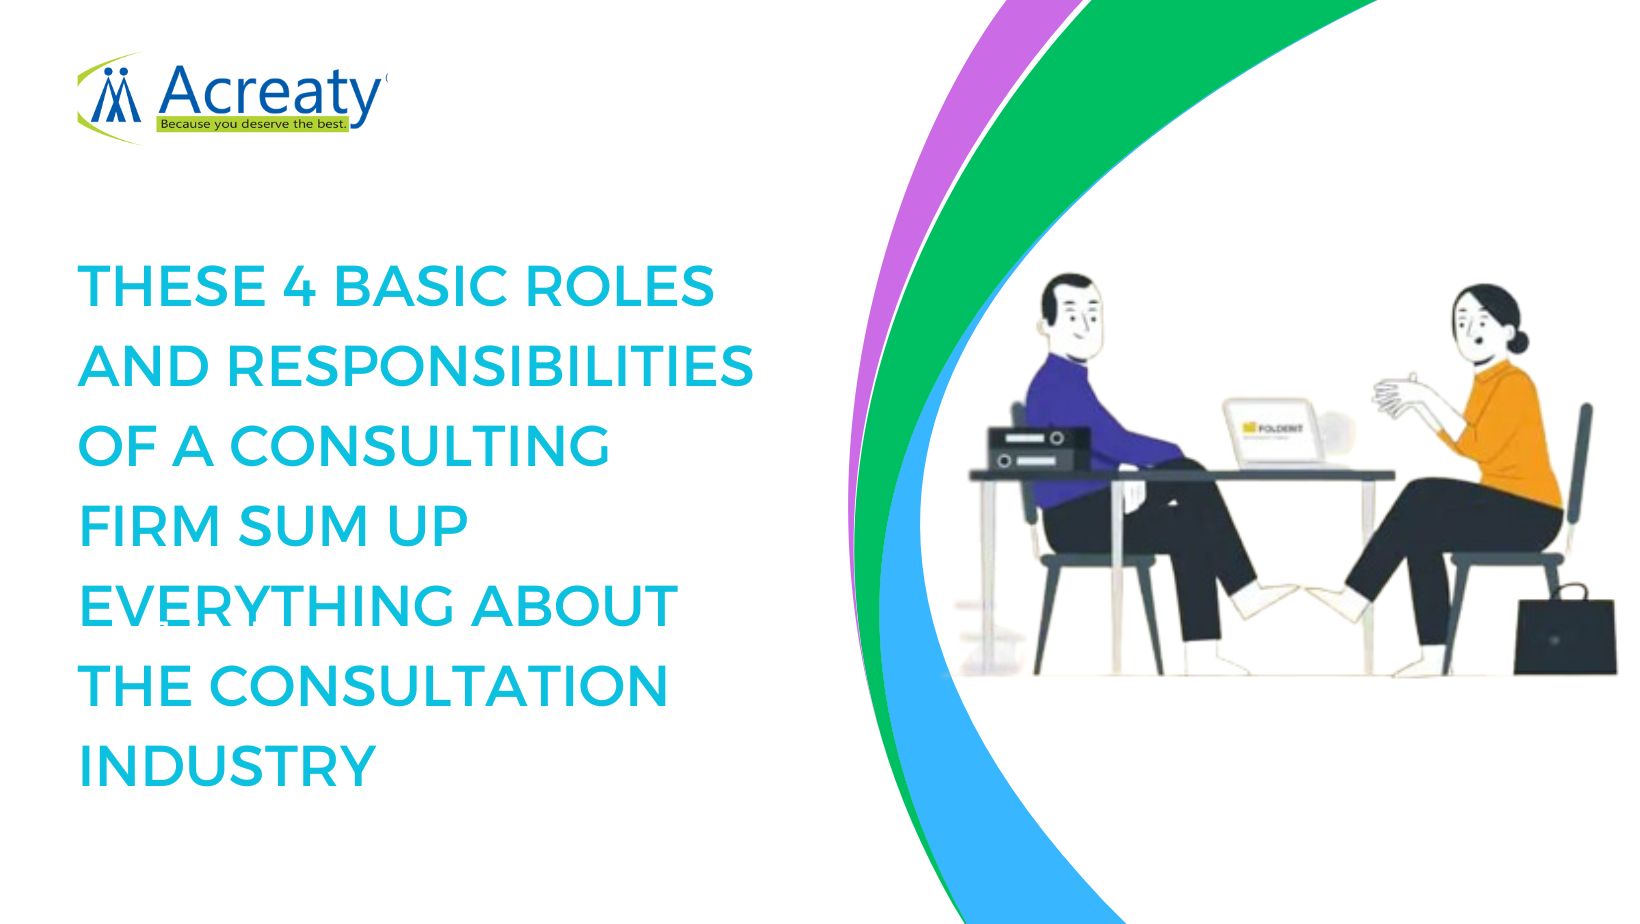 These 4 Basic Roles and Responsibilities of a Consulting Firm sum up everything about the Consultation Industry